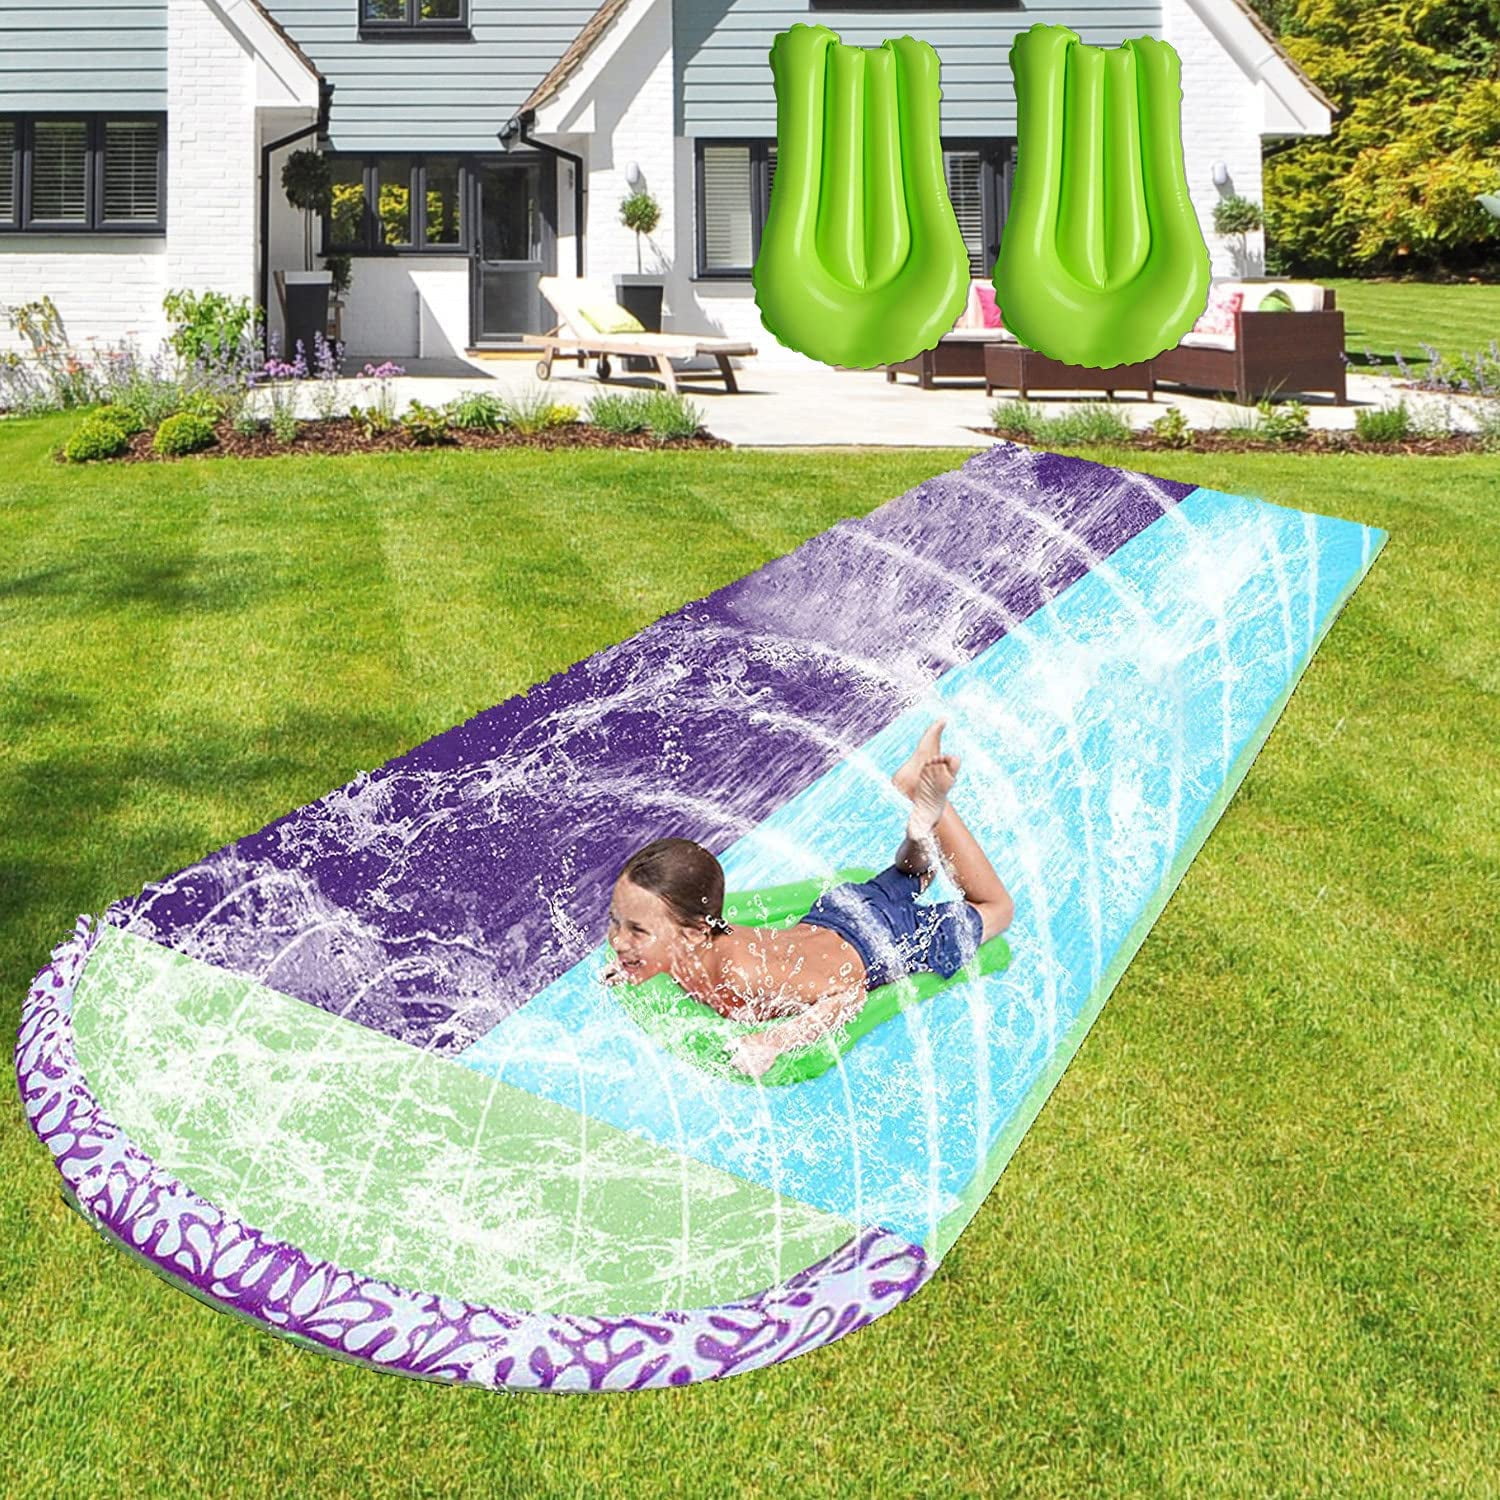 Outdoor Water Slides Outdoor Water Toys 188x28inch Garden Backyard Giant Racing Lanes and Splash Pool Water Slip and Slide for Kids Adults 